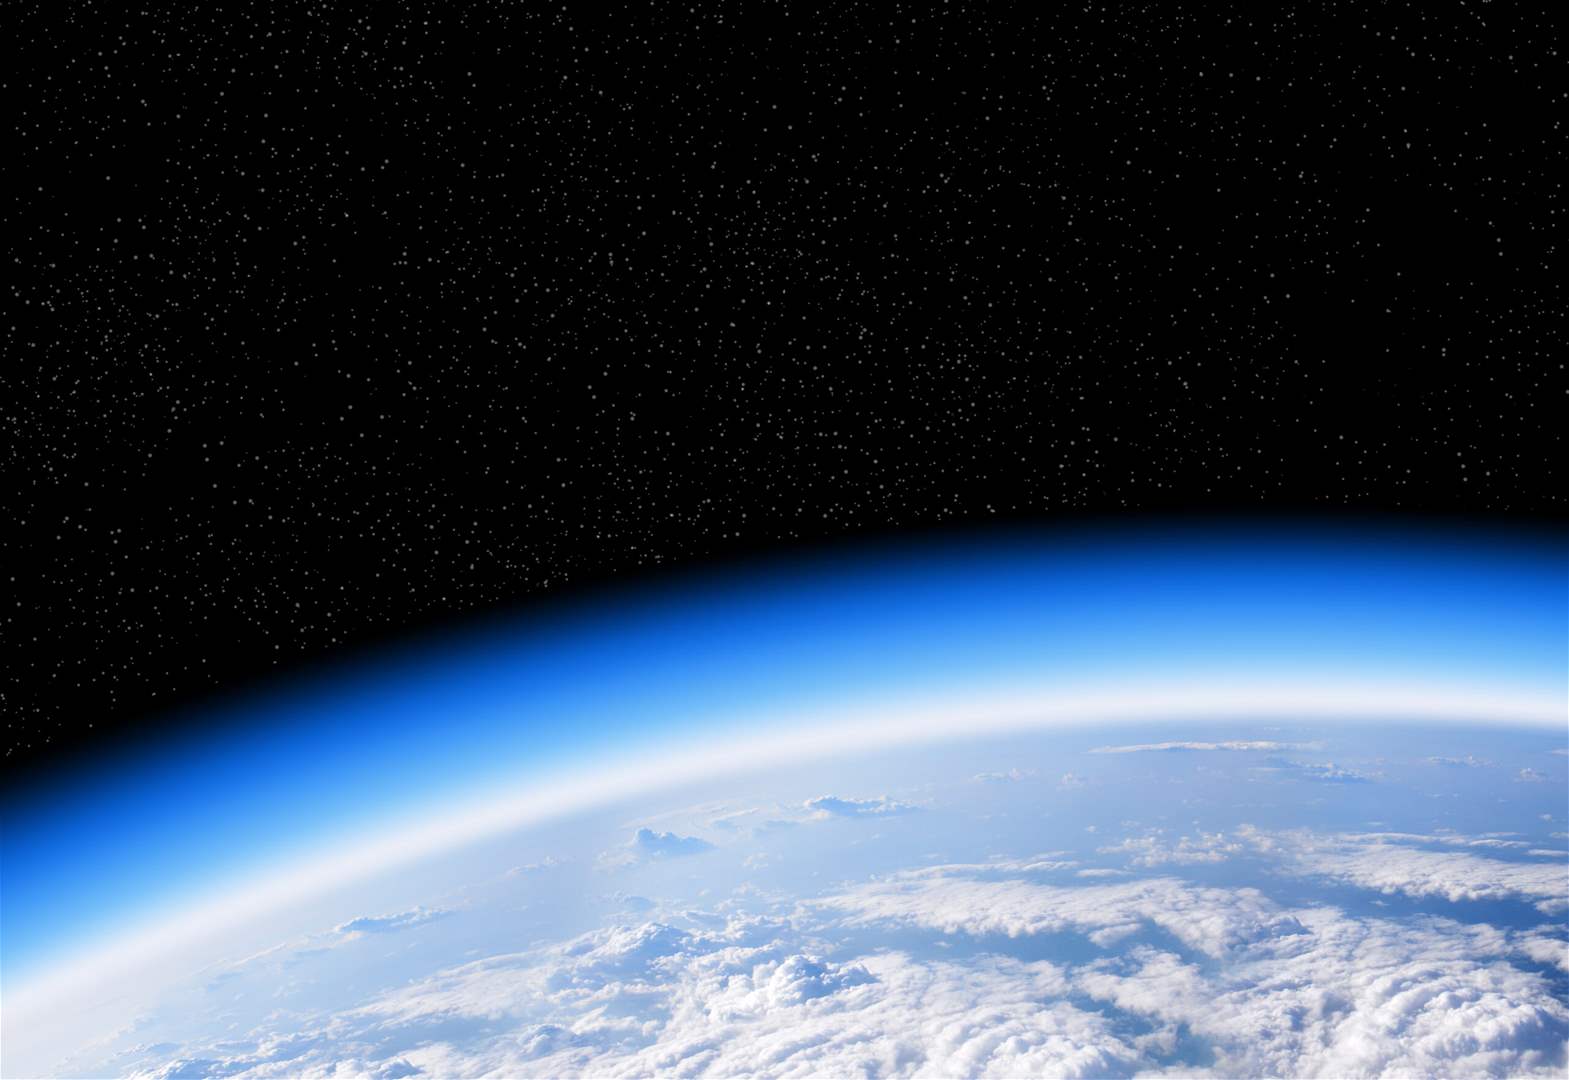 What would happen if the ozone layer in the atmosphere completely disappears?